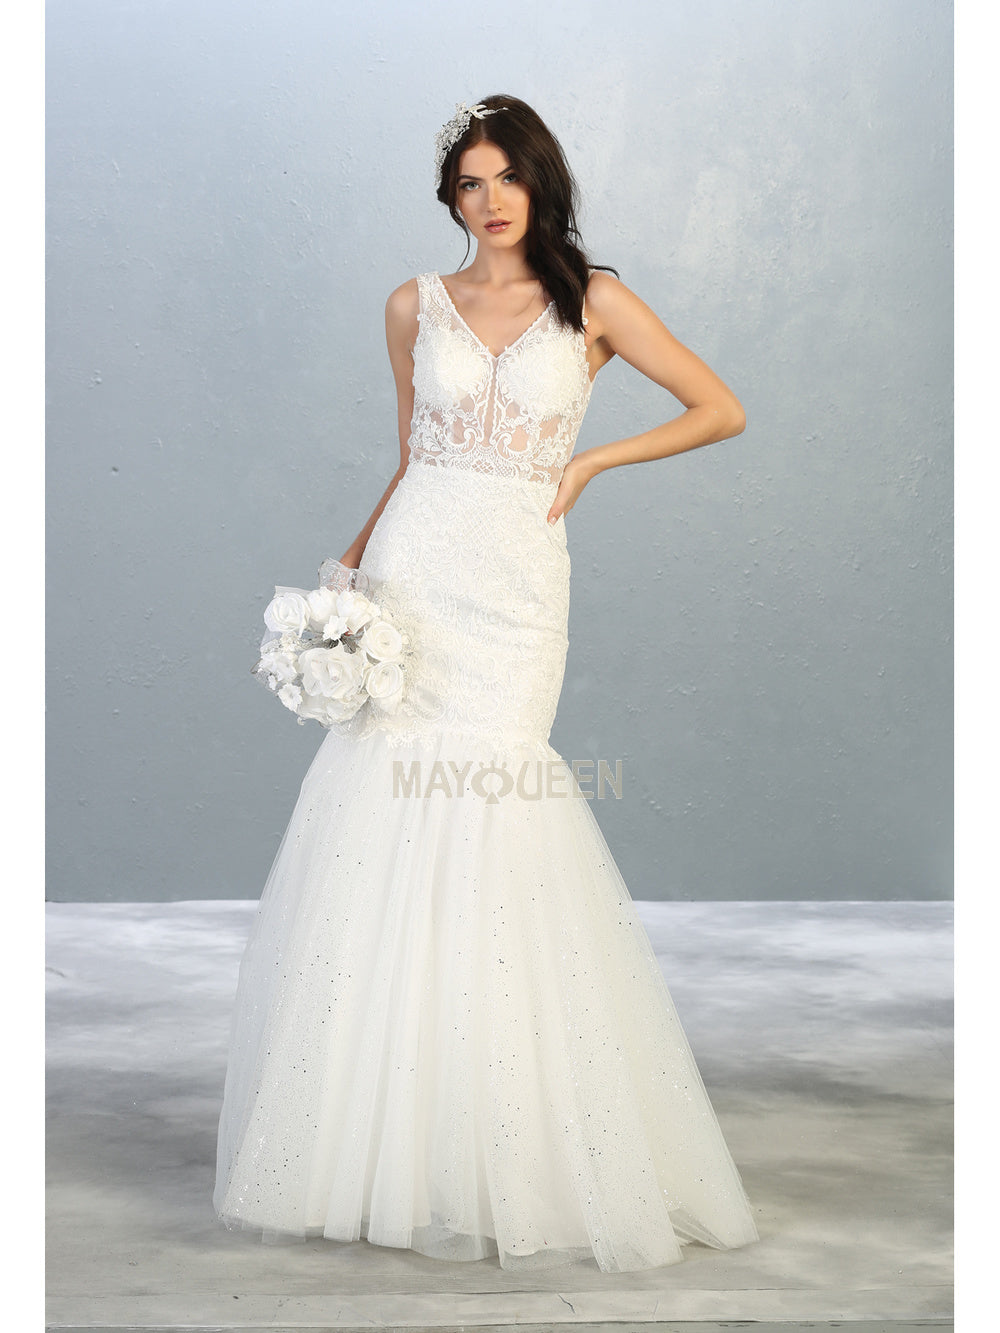 MQ 7849 W - Lace & Bead Embellished Mermaid Wedding Gown with Illusion Bodice V-Neck & Tulle Skirt Wedding Gown Mayqueen 4 ivory 